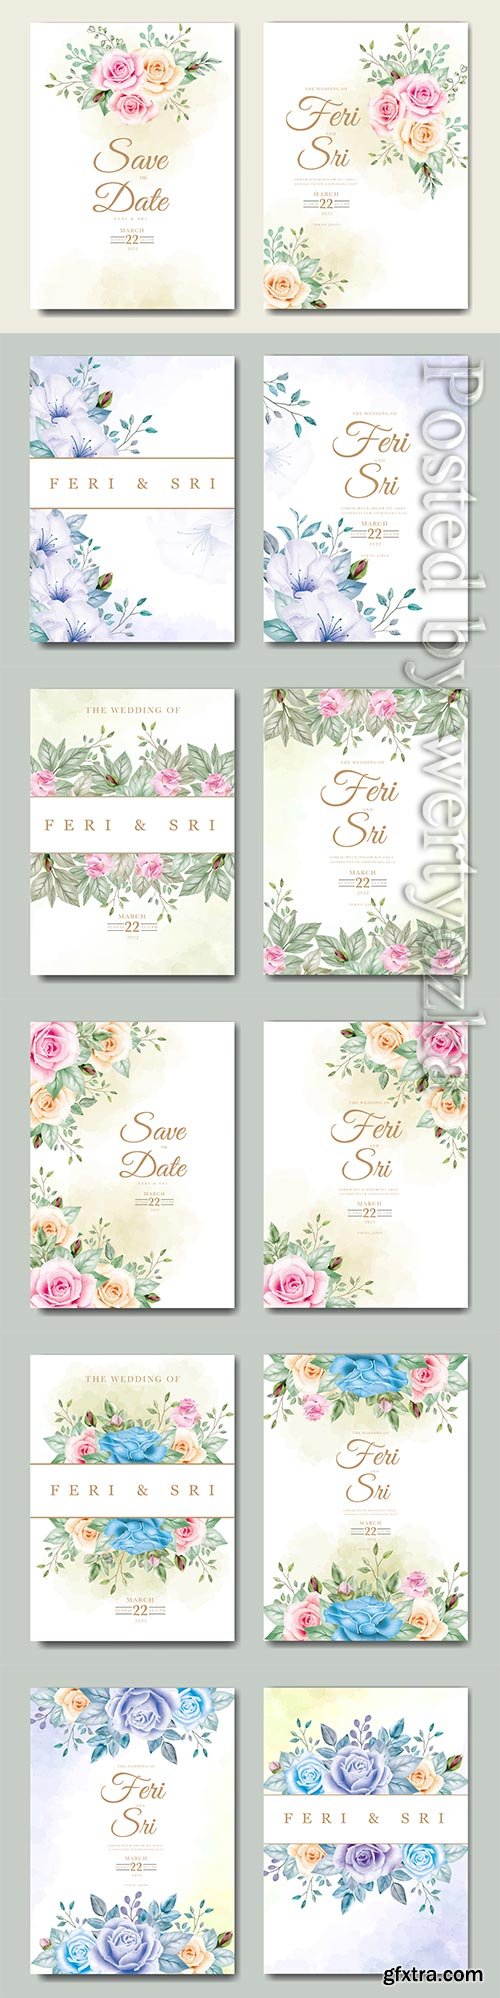 Beautiful wedding invitation vector card with floral watercolor